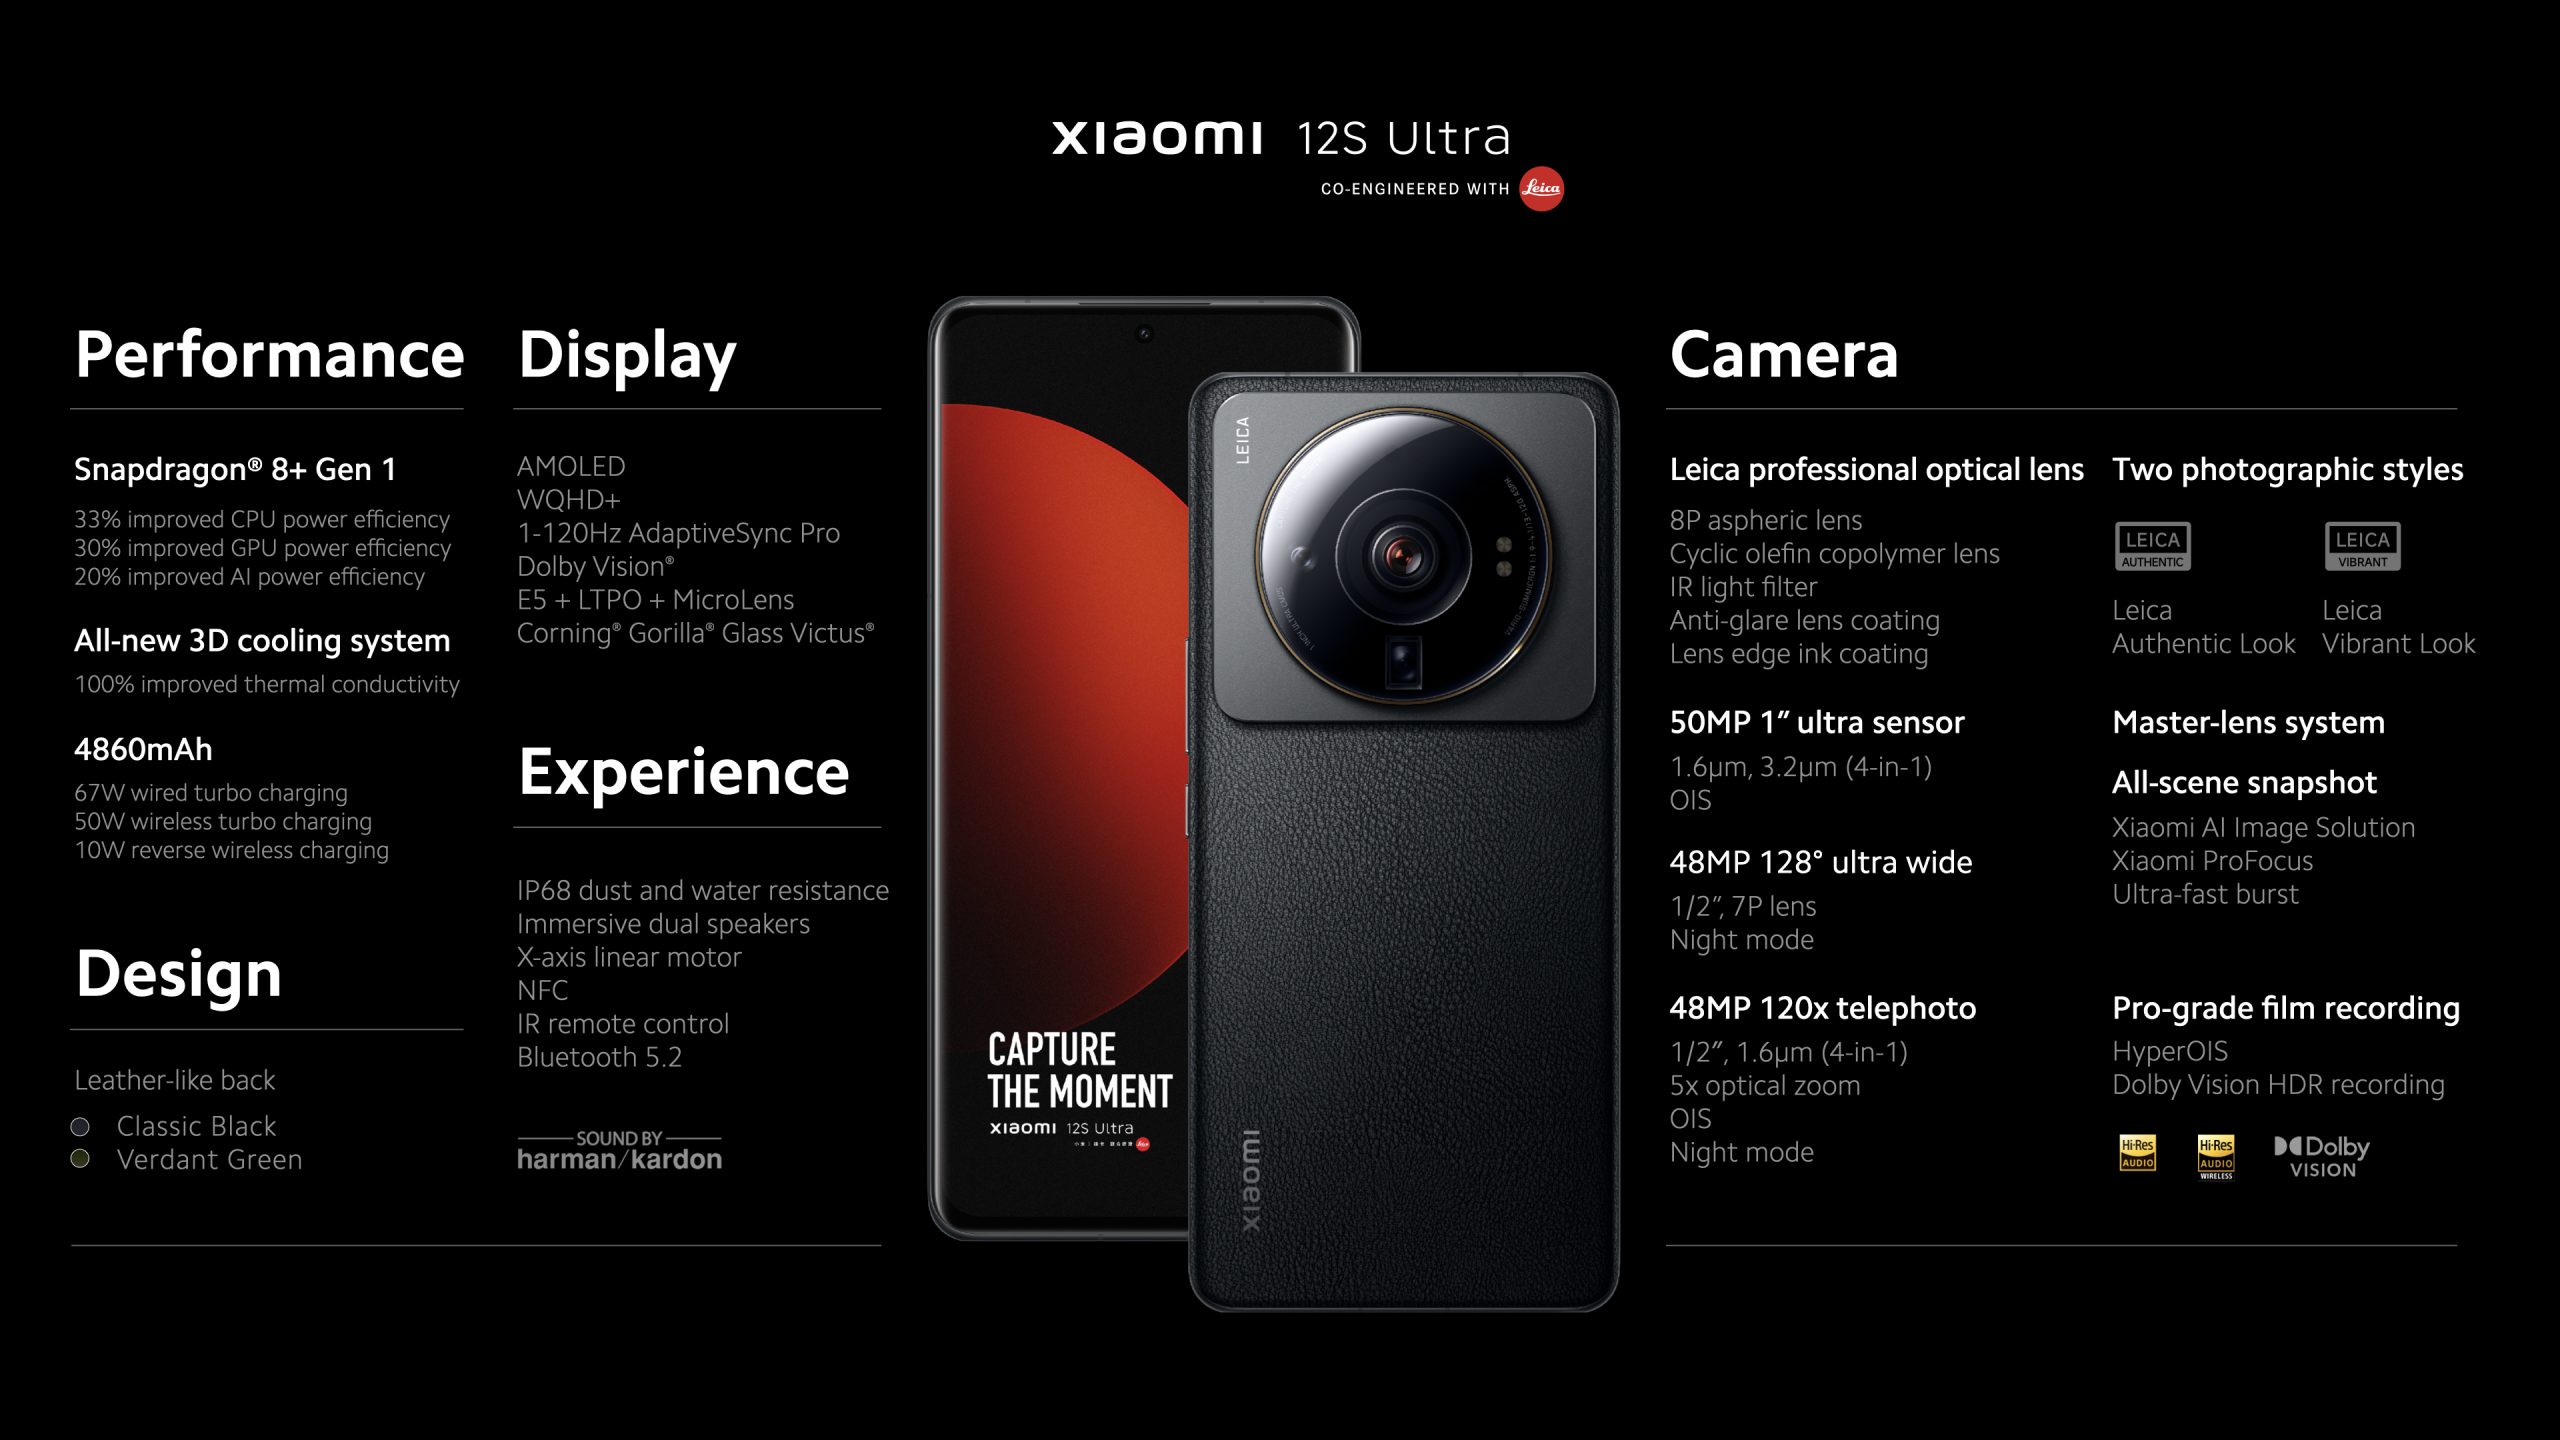 the Xiaomi 12s Ultra comes with the Snapdragon 8+ Gen 1.